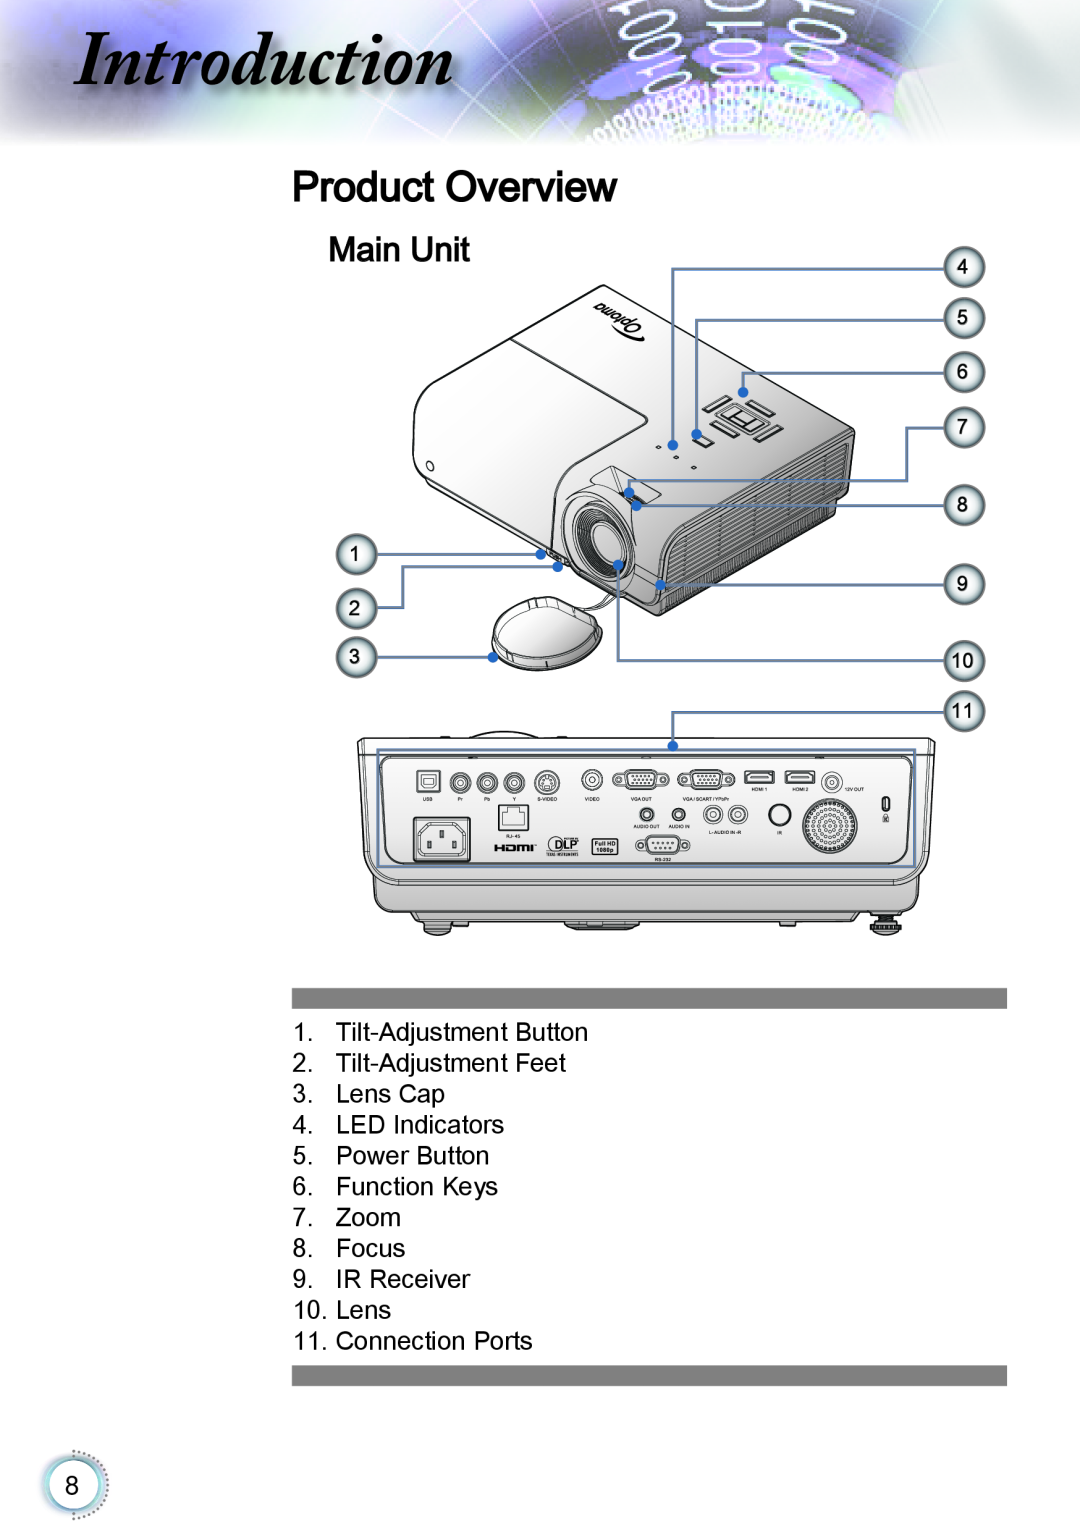 Optoma Technology TH1060P manual Product Overview, Main Unit, Introduction 